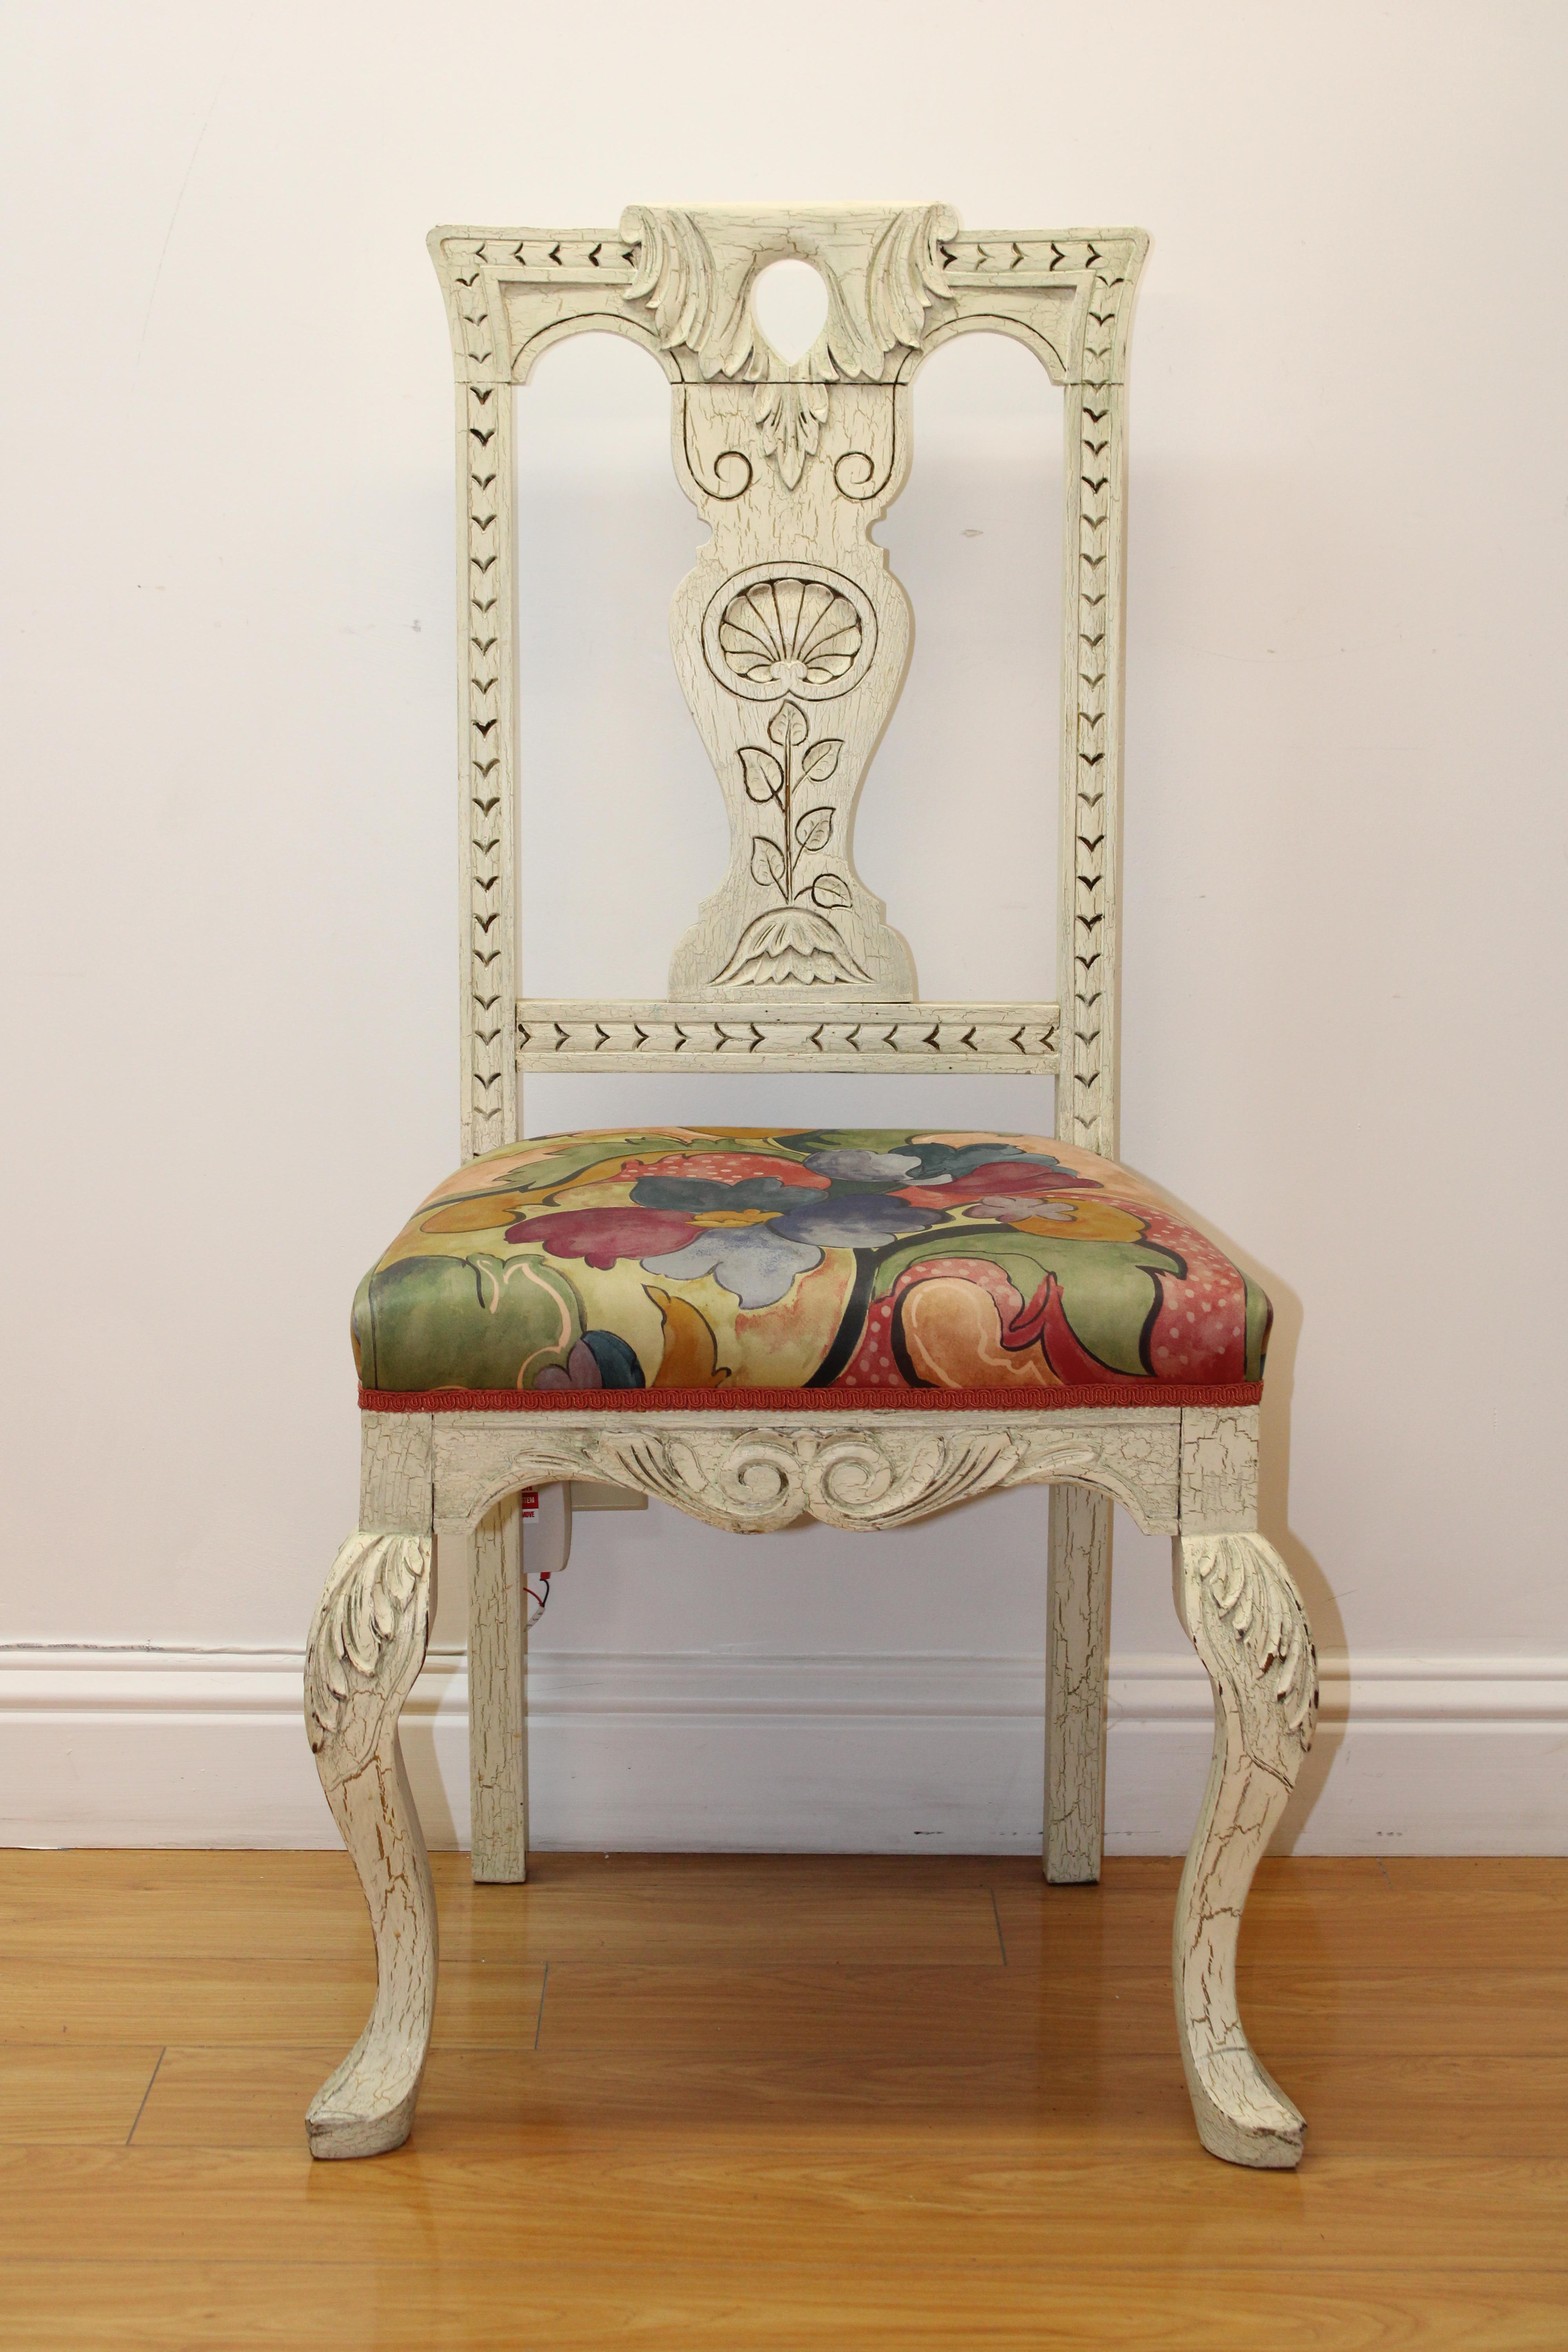 C. mid-late 20th century

Beautiful & colorful pair of classic side chairs w/ white washed paint & floral design (upholstered seats).